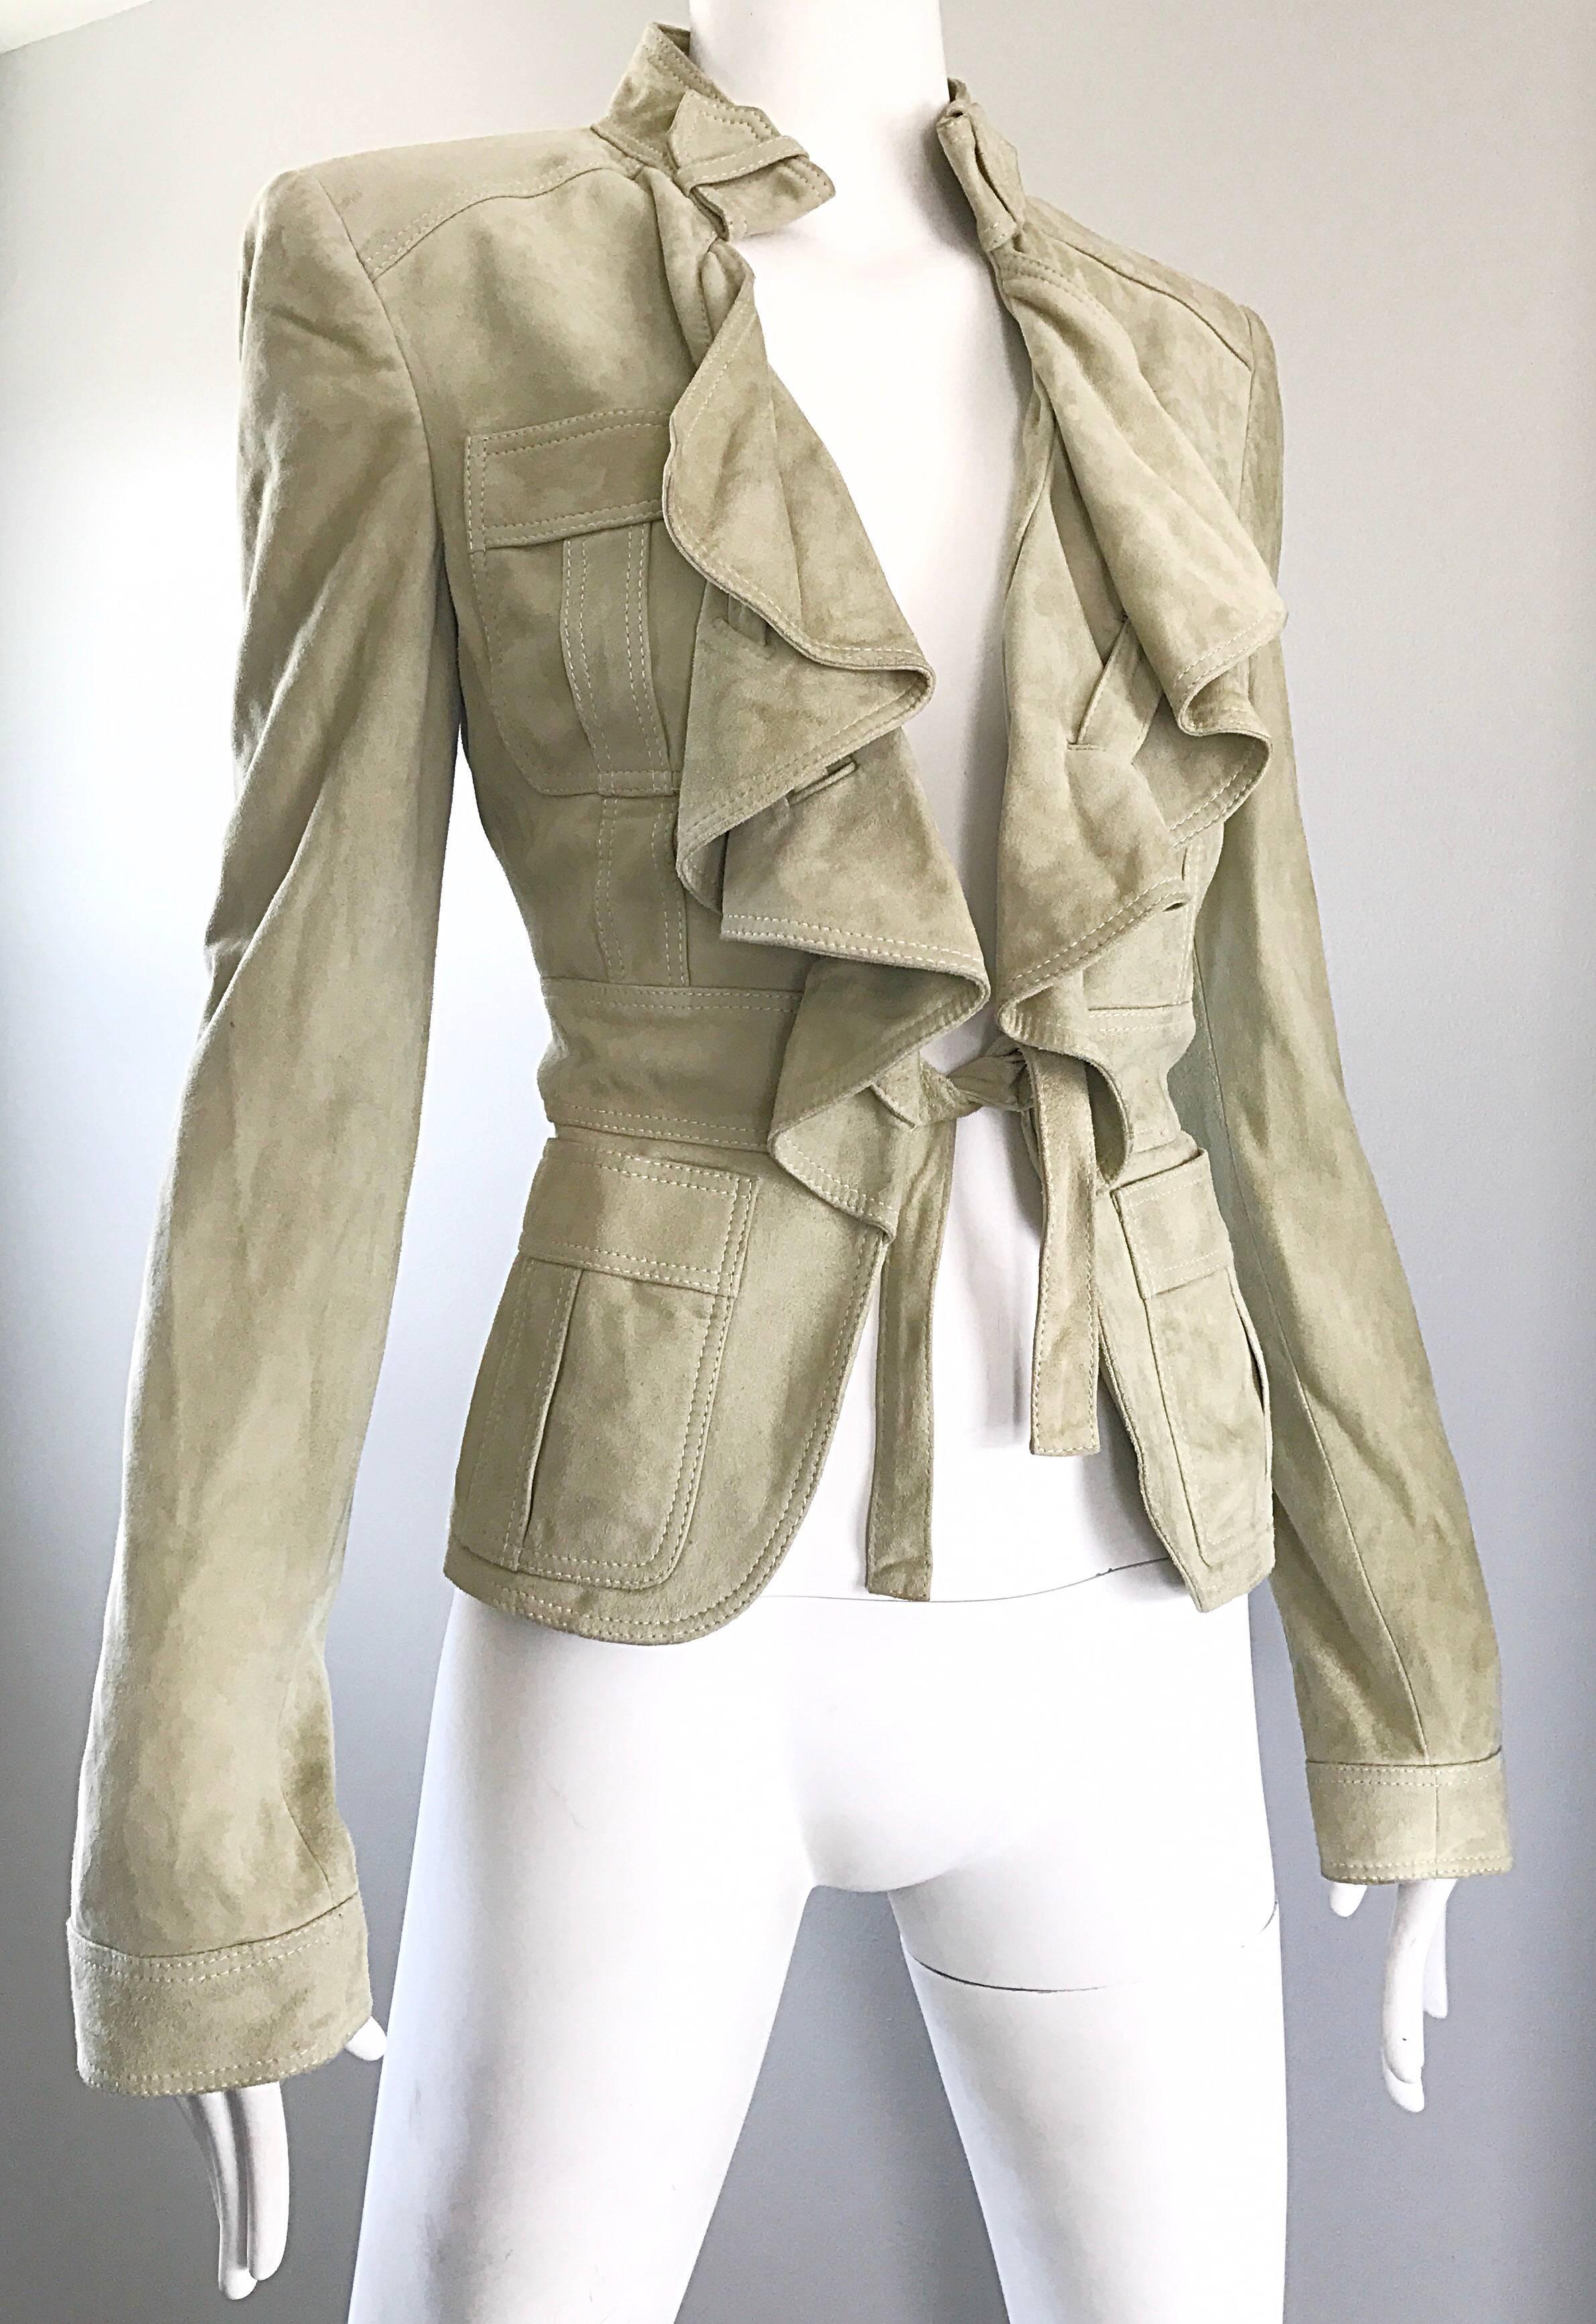 Tom Ford for Gucci Pistachio Khaki Suede Leather 1990s Vintage Ruffle Jacket  1